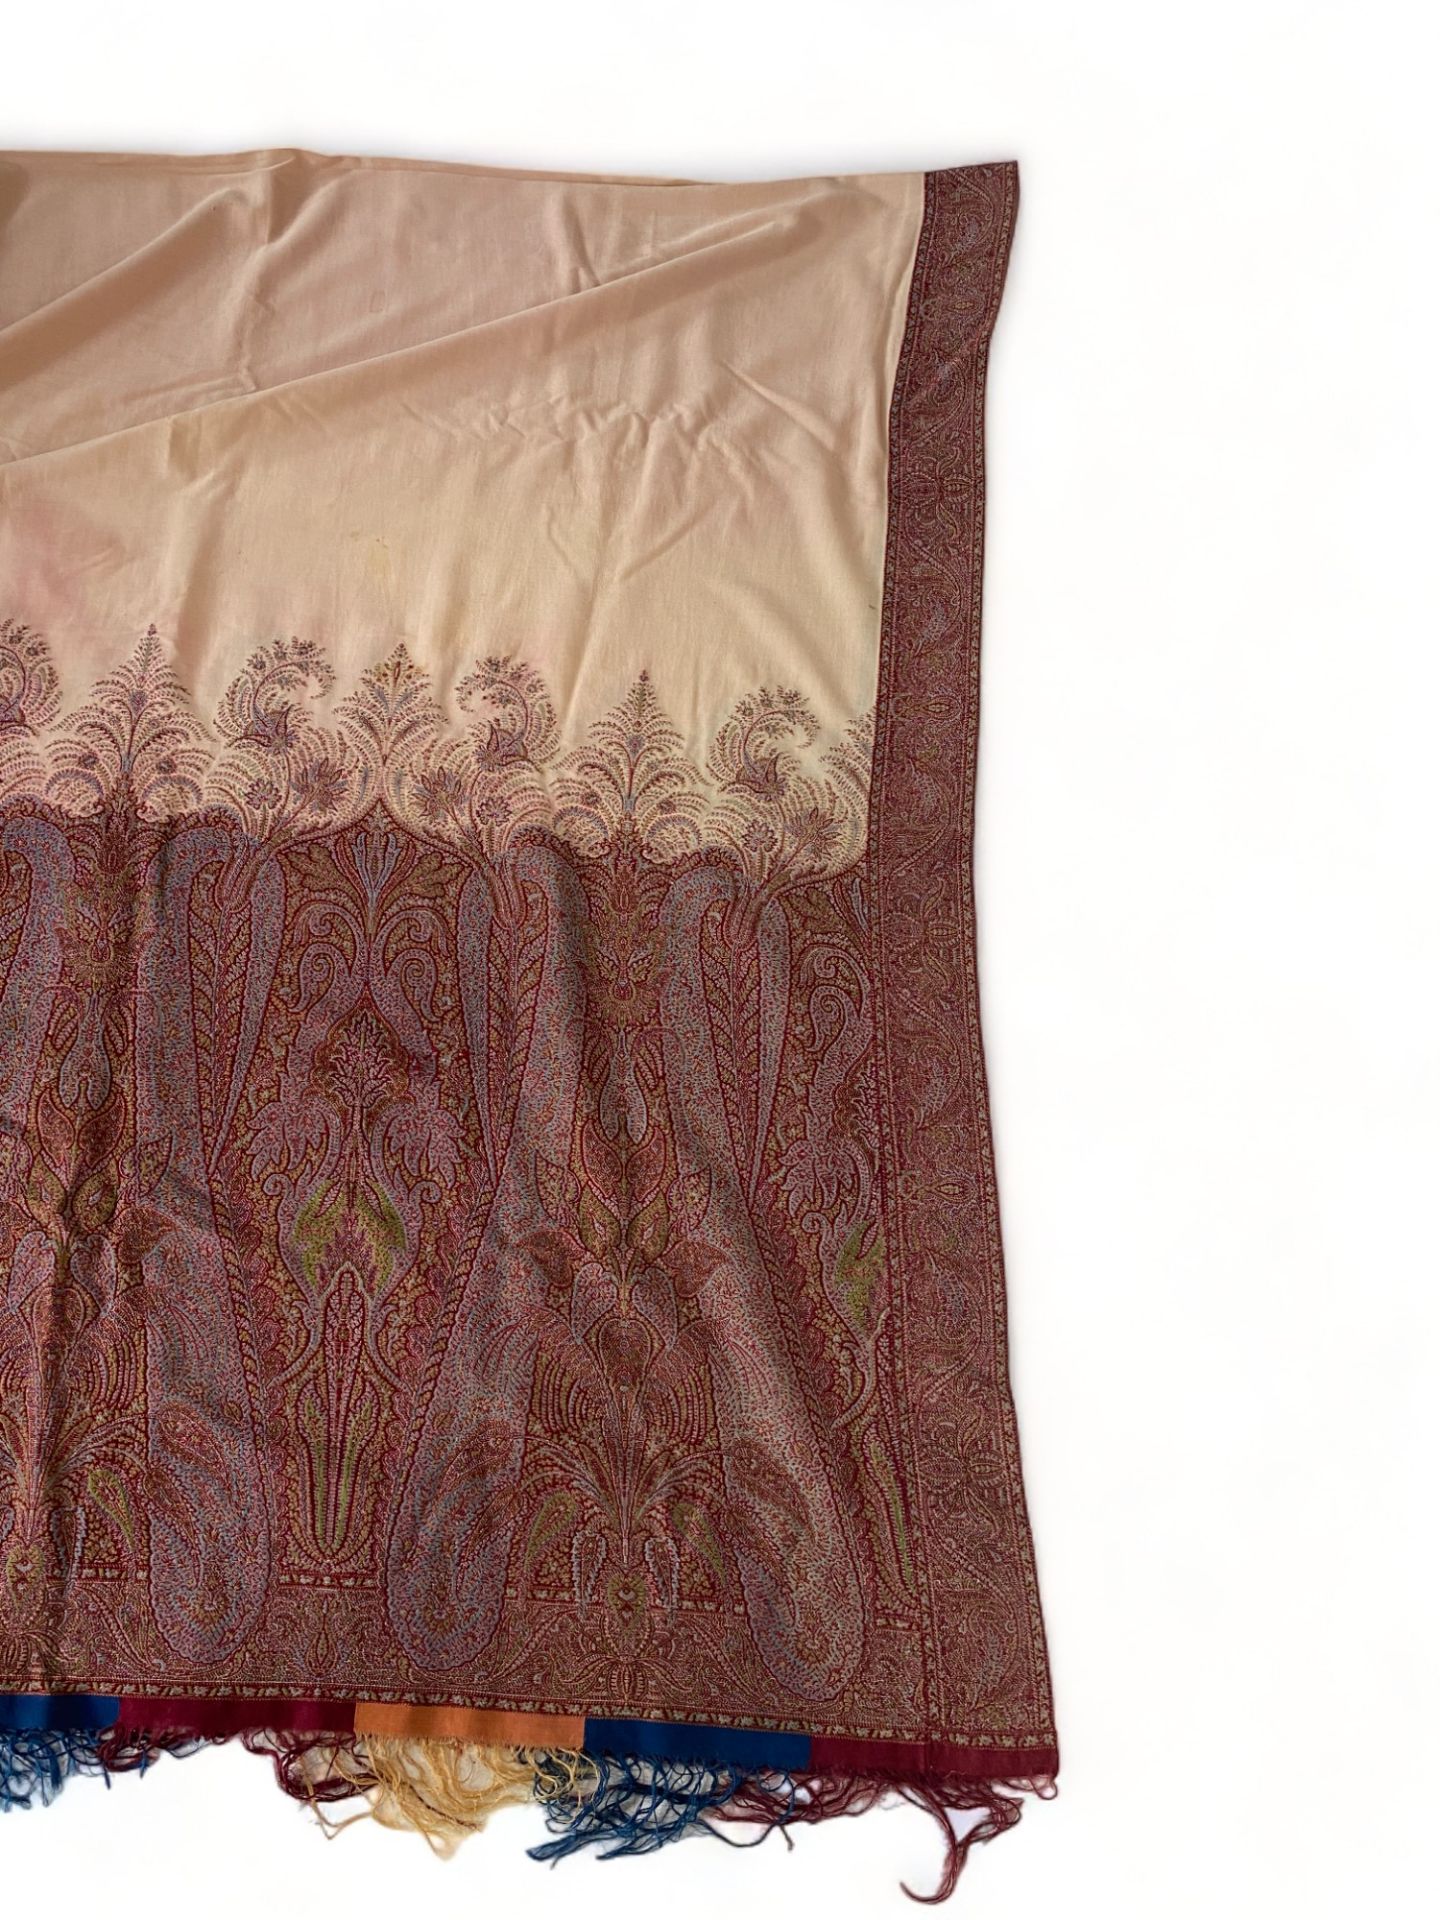 A 19th century red, brown and blue paisley cotton shawl together with another shawl - Image 11 of 13